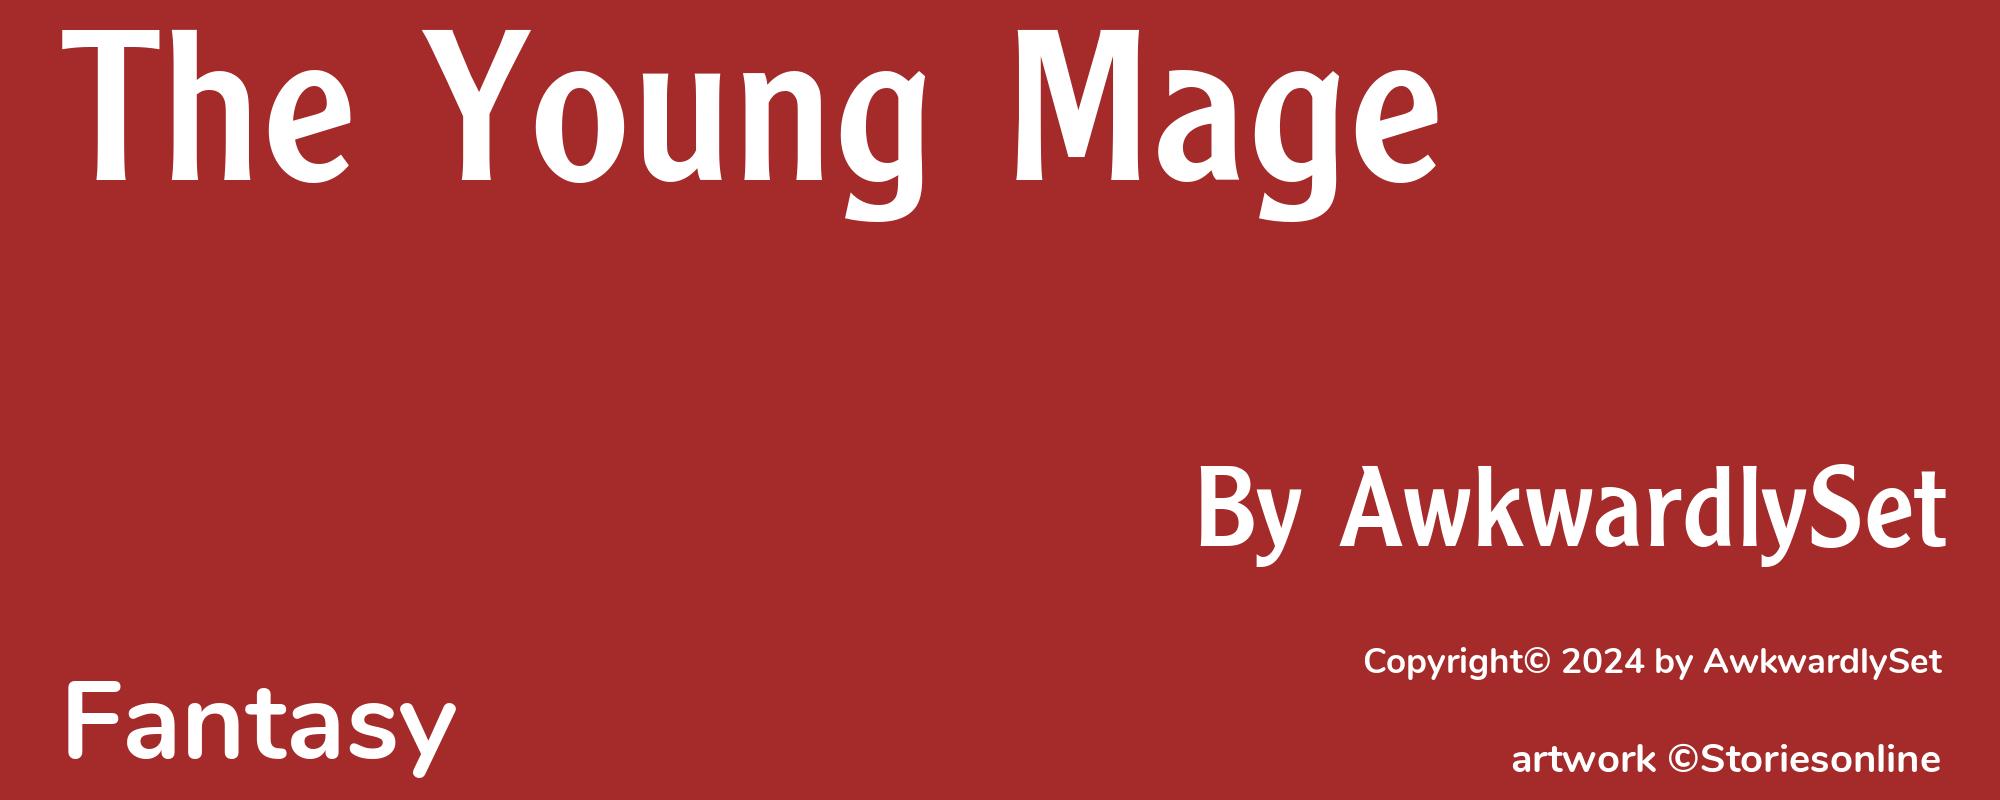 The Young Mage - Cover